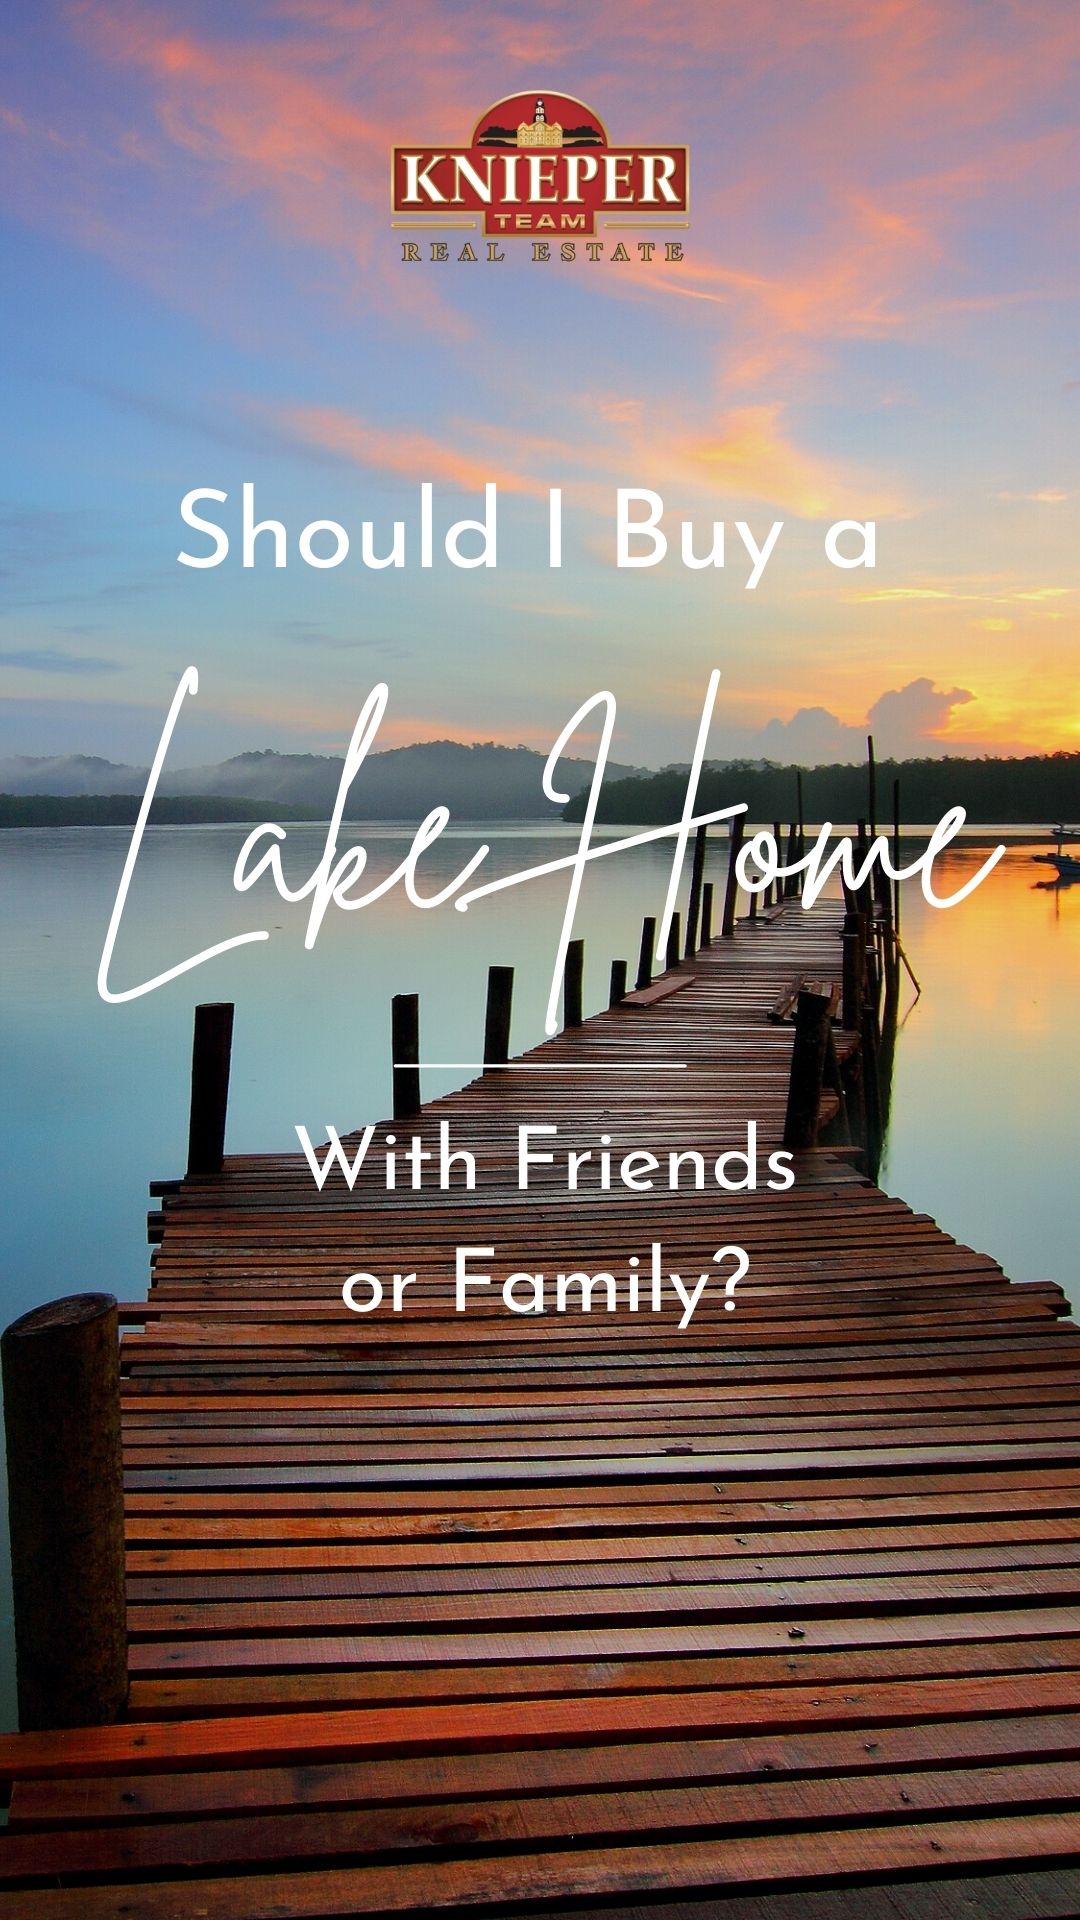 Should I Buy a Lake Cabin with Friends or Family